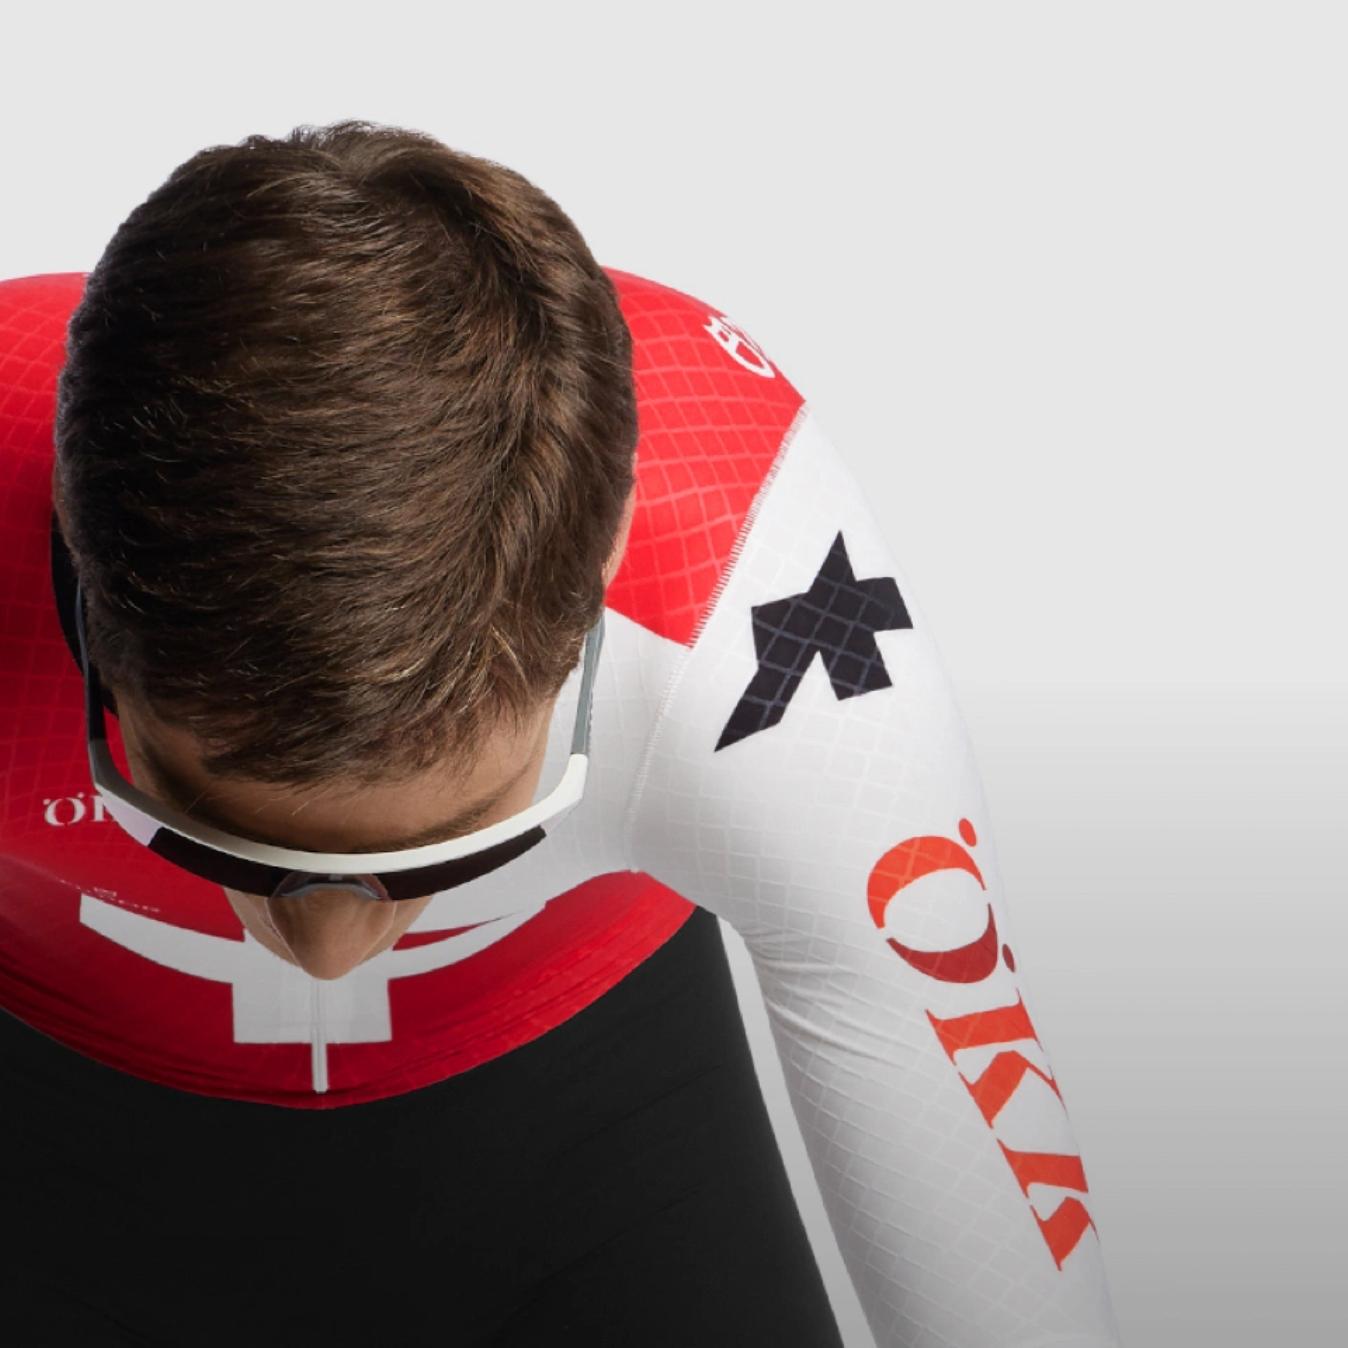 The skinsuit has a grid pattern